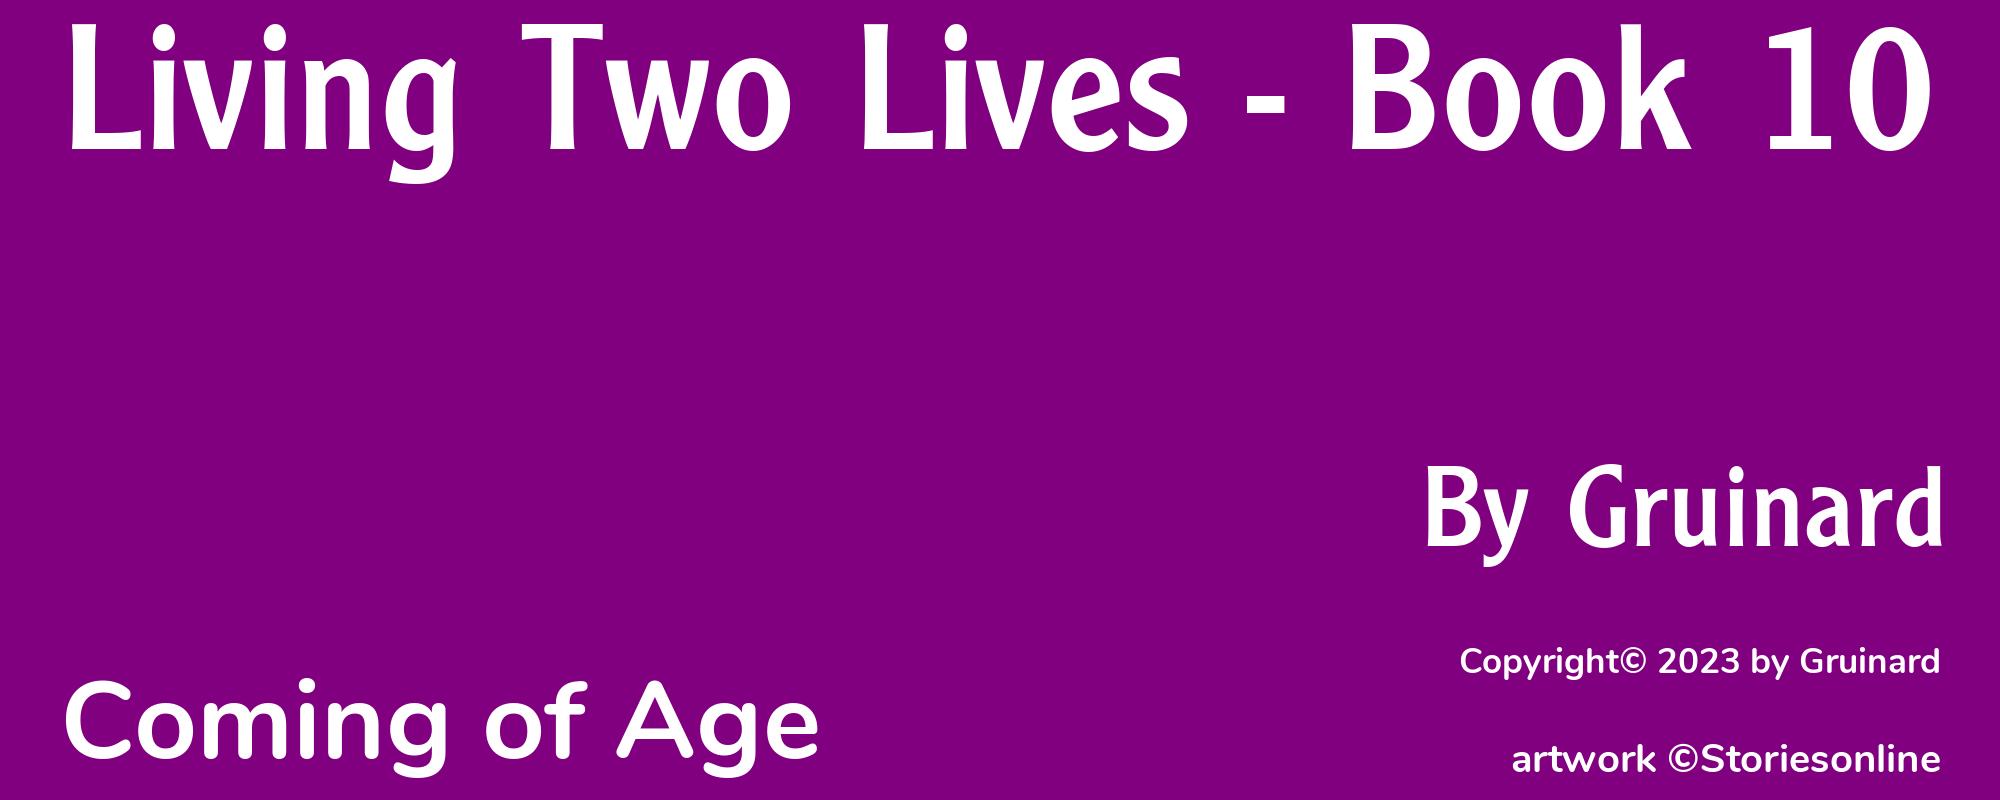 Living Two Lives - Book 10 - Cover